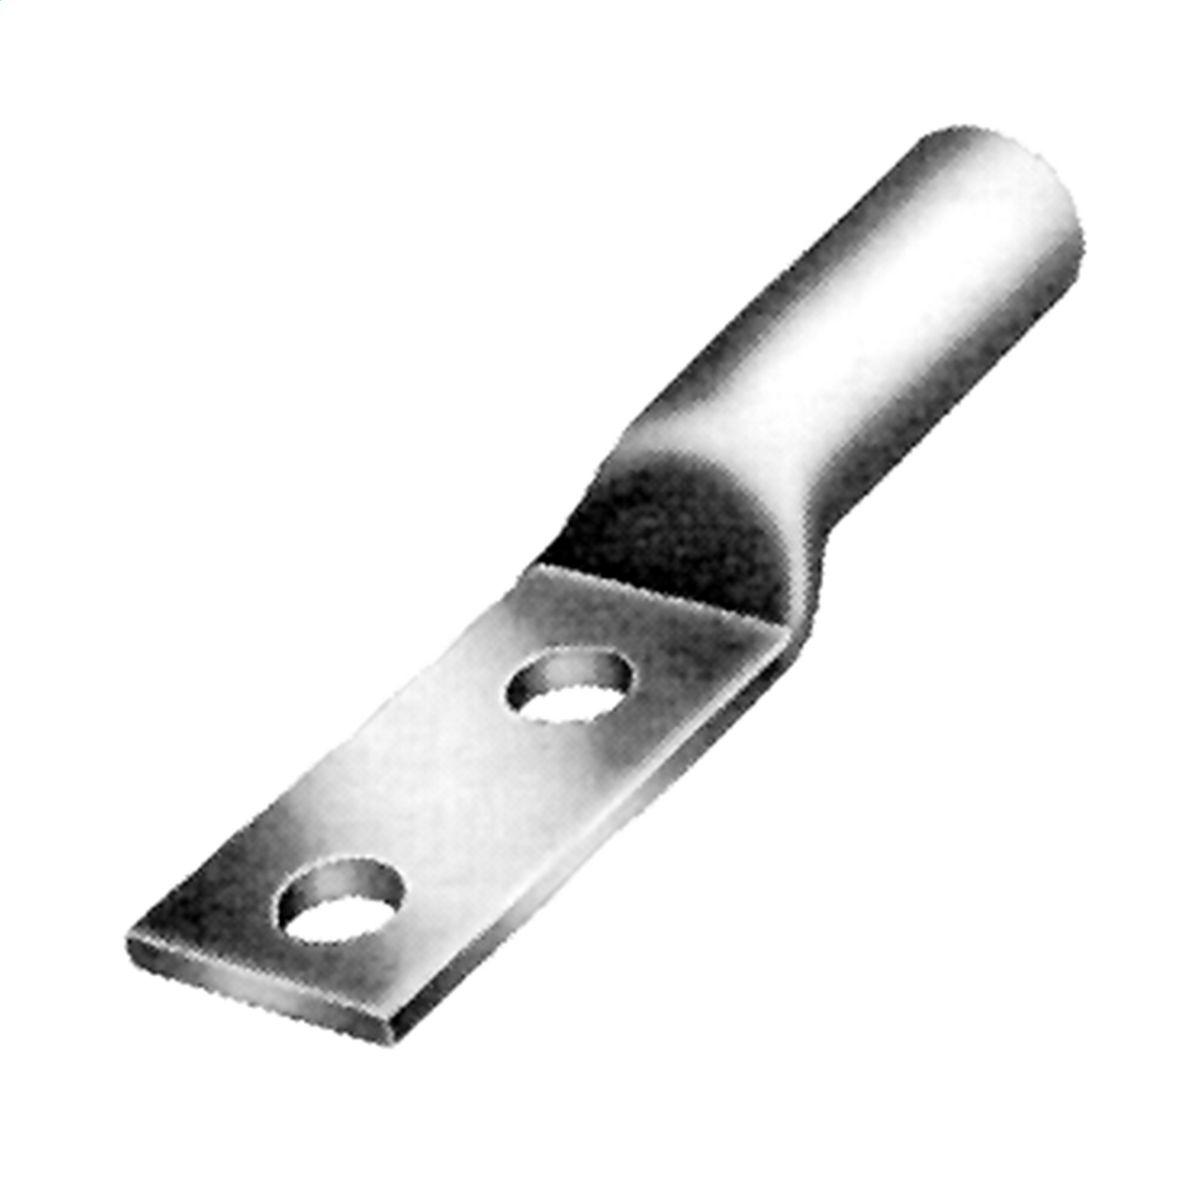 Hubbell VAUL36012BN Aluminum Compression Terminal for 300 - 350 AL/CU, 266.8 18/1, 26/7, 336.4 18/1 ACSR, 350 - 400 COMPACT, 2 HOLE  ; Connectors are prefilled with rubber compatible inhibitor and sealed with color coded end caps. ; 